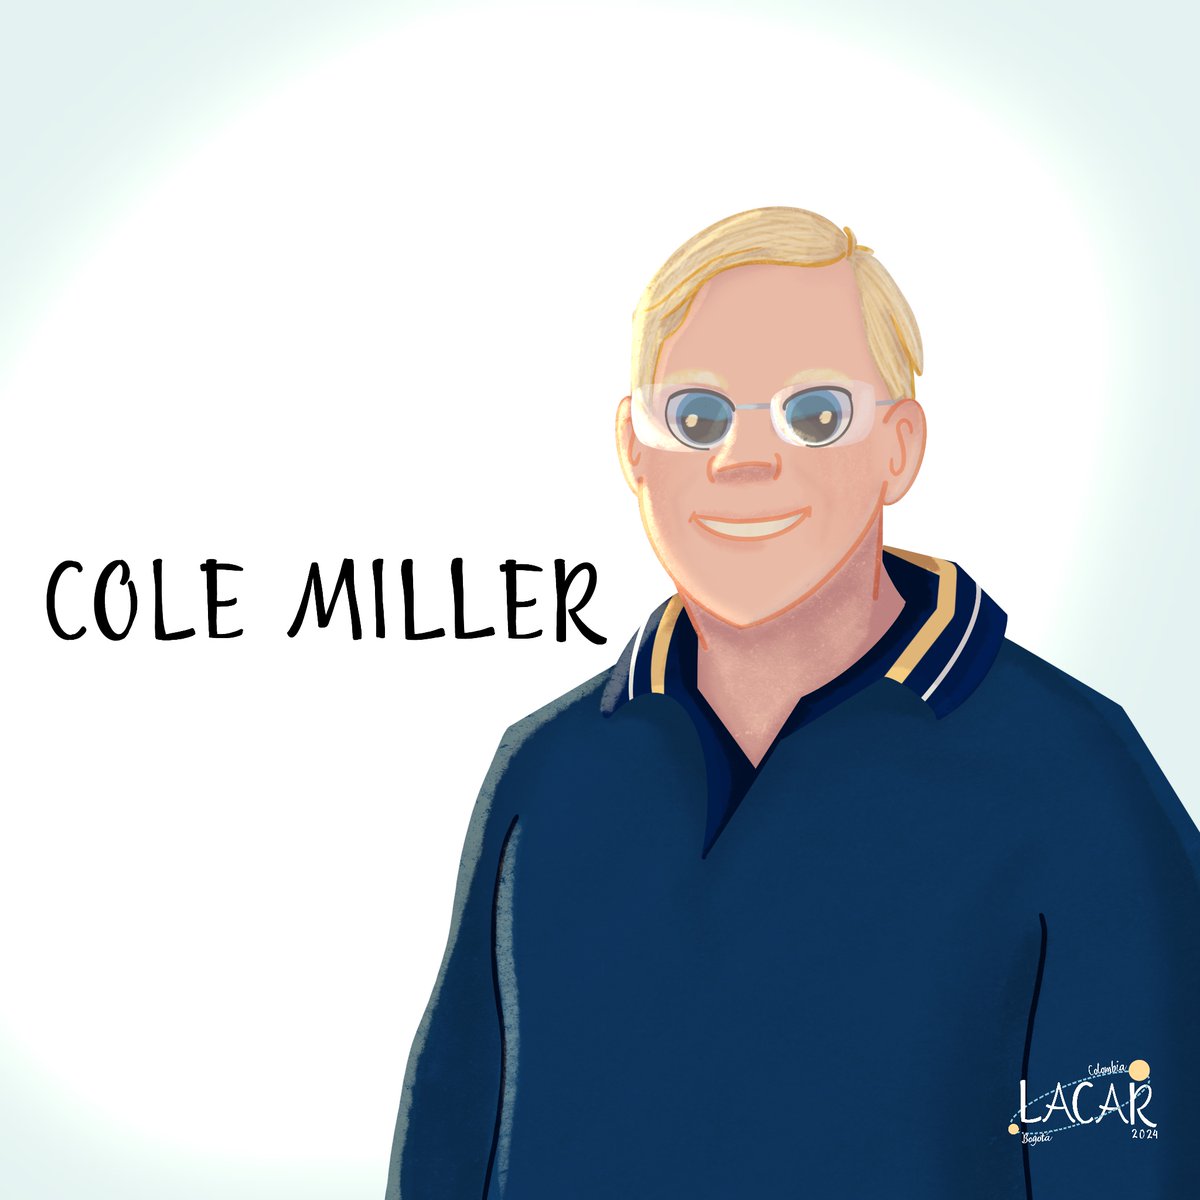 Meet one of our bridge speakers: Cole Miller does mainly theoretical work on black holes, neutron stars, and gravitational waves, and is interested in what fundamental physics can be learned from astronomical observations.